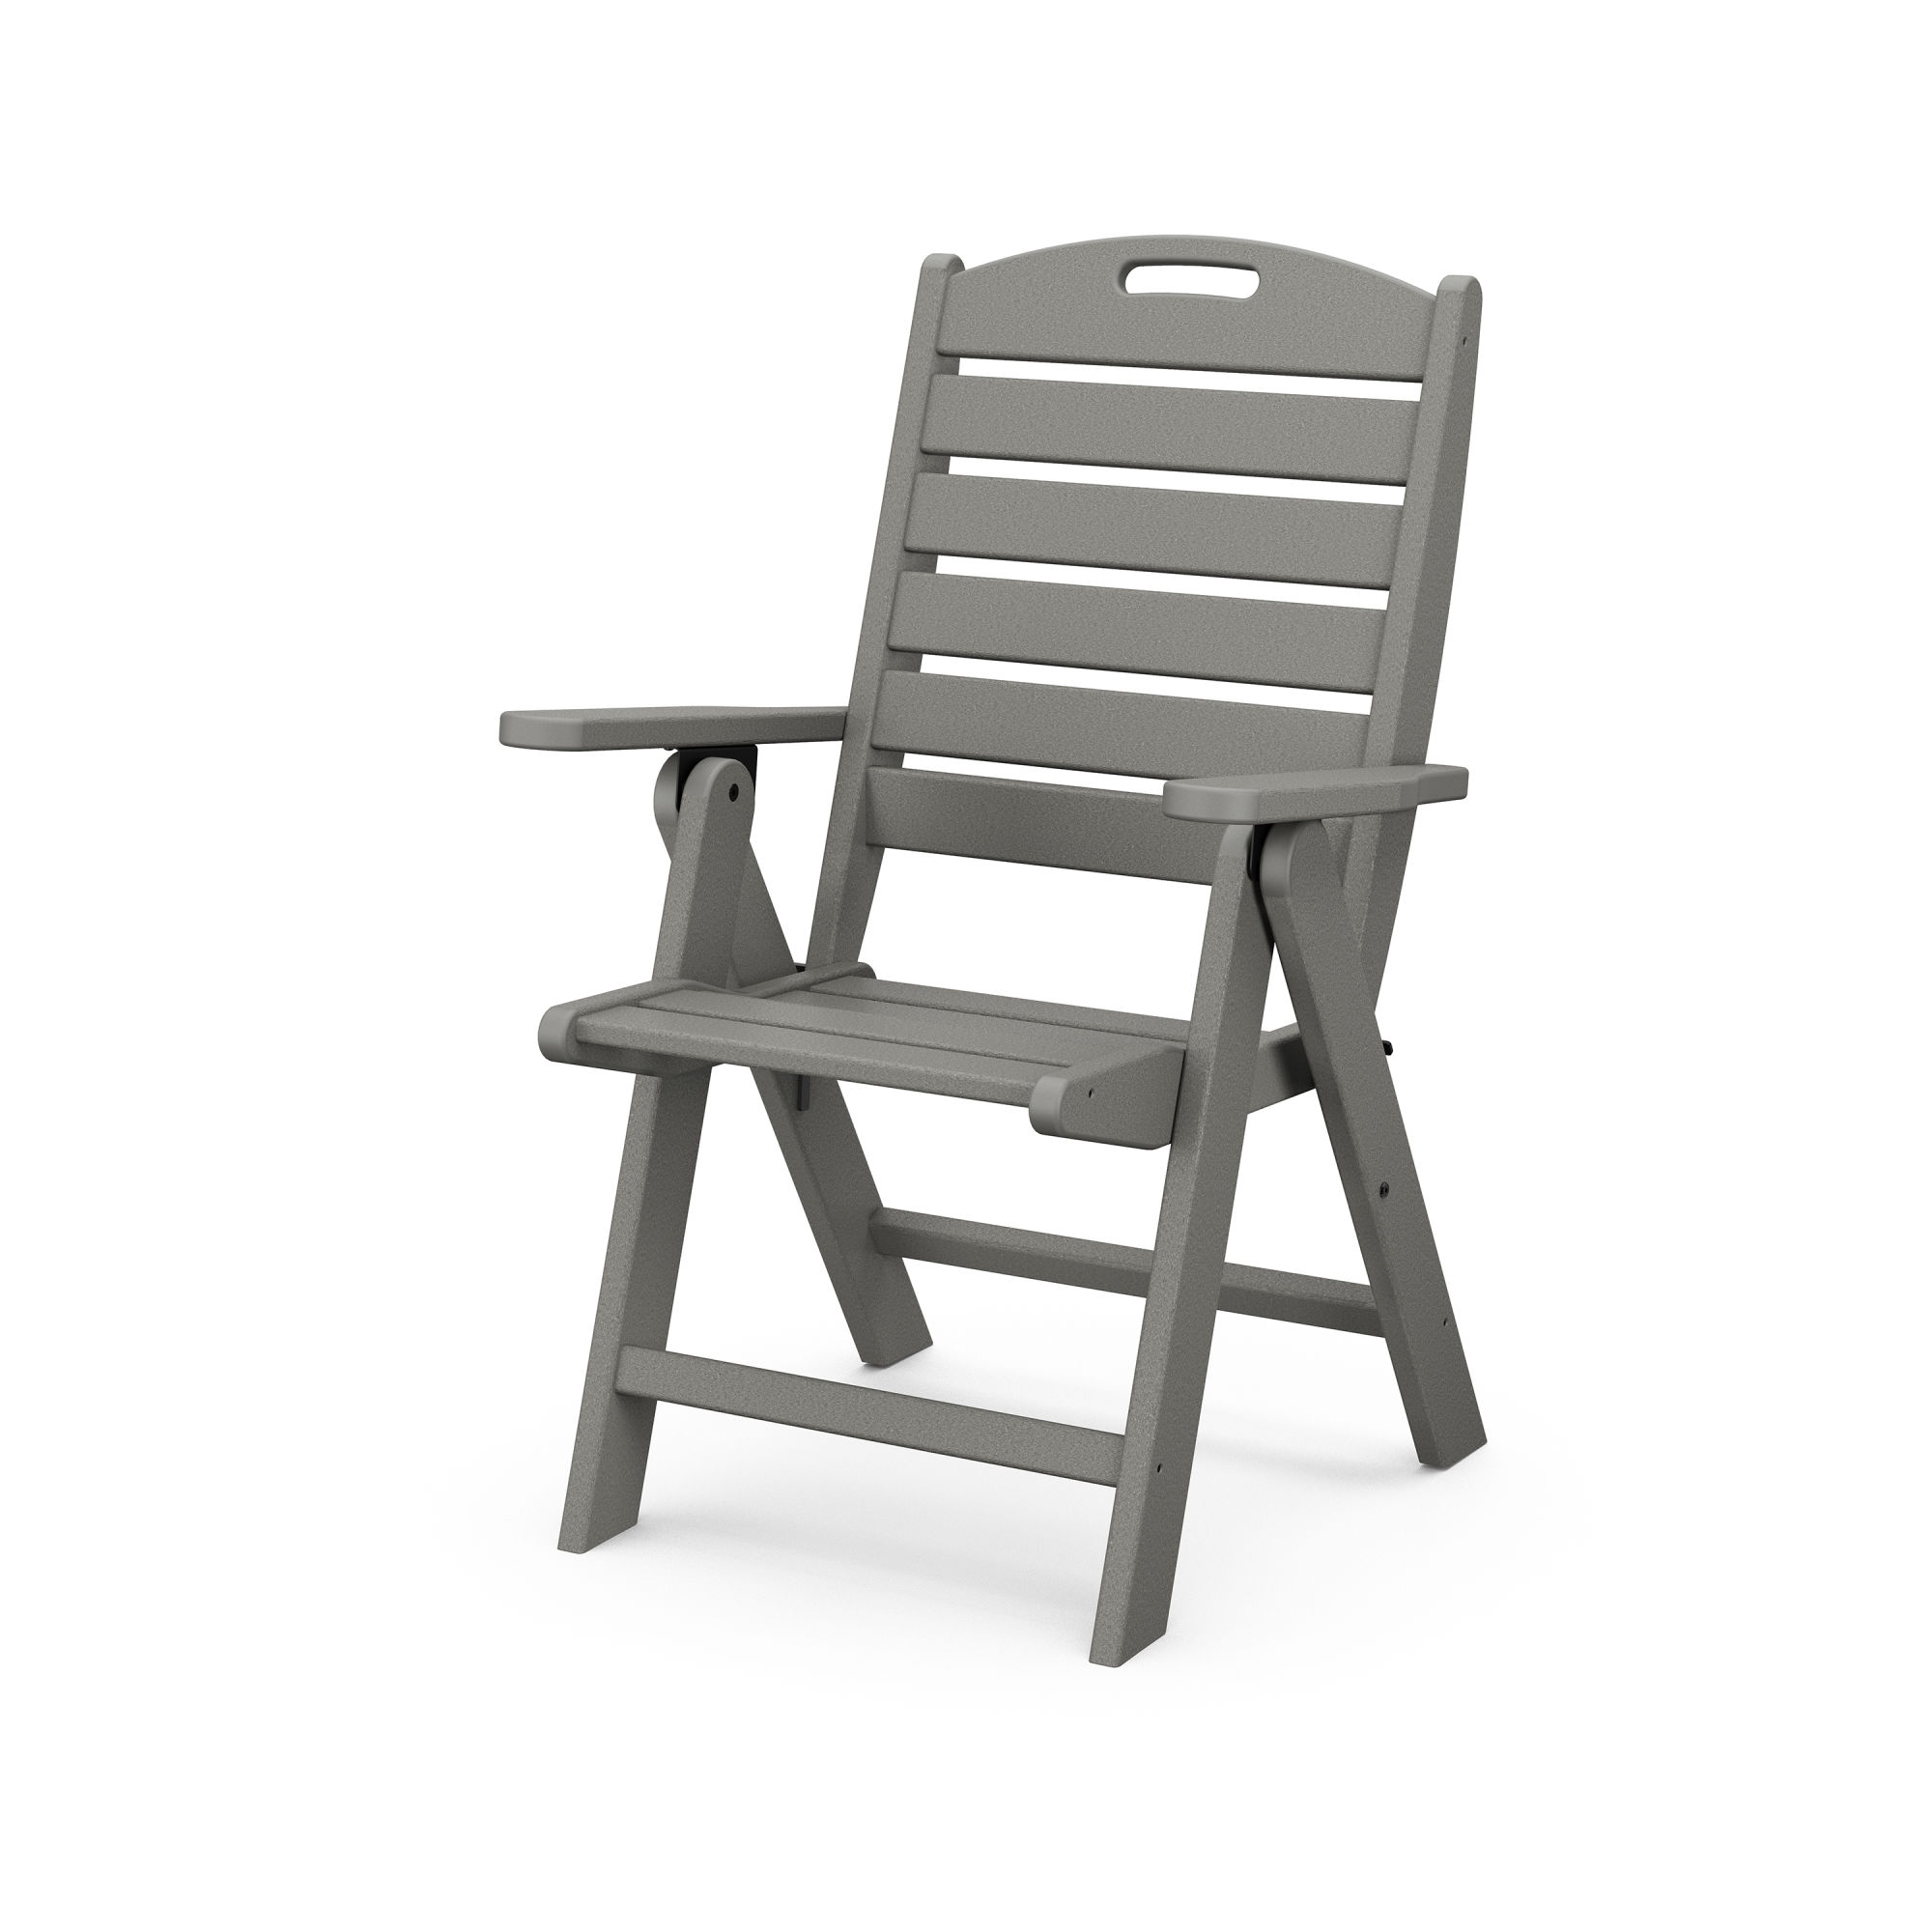 POLYWOOD NCH38WH Nautical Highback Chair in White 